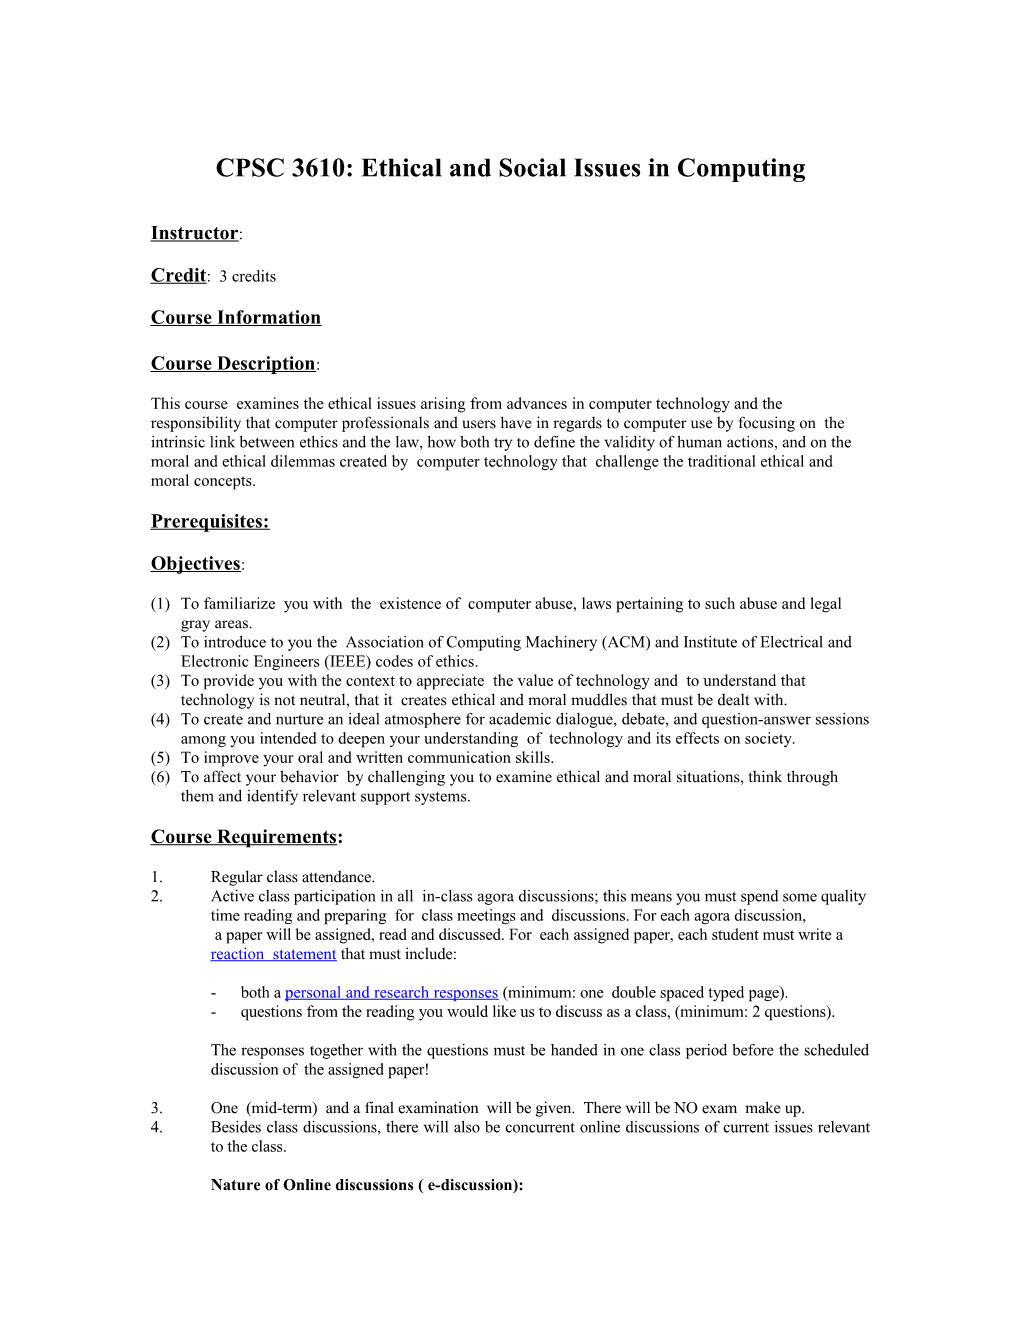 CPSC 385: Ethical and Social Issues in Computing